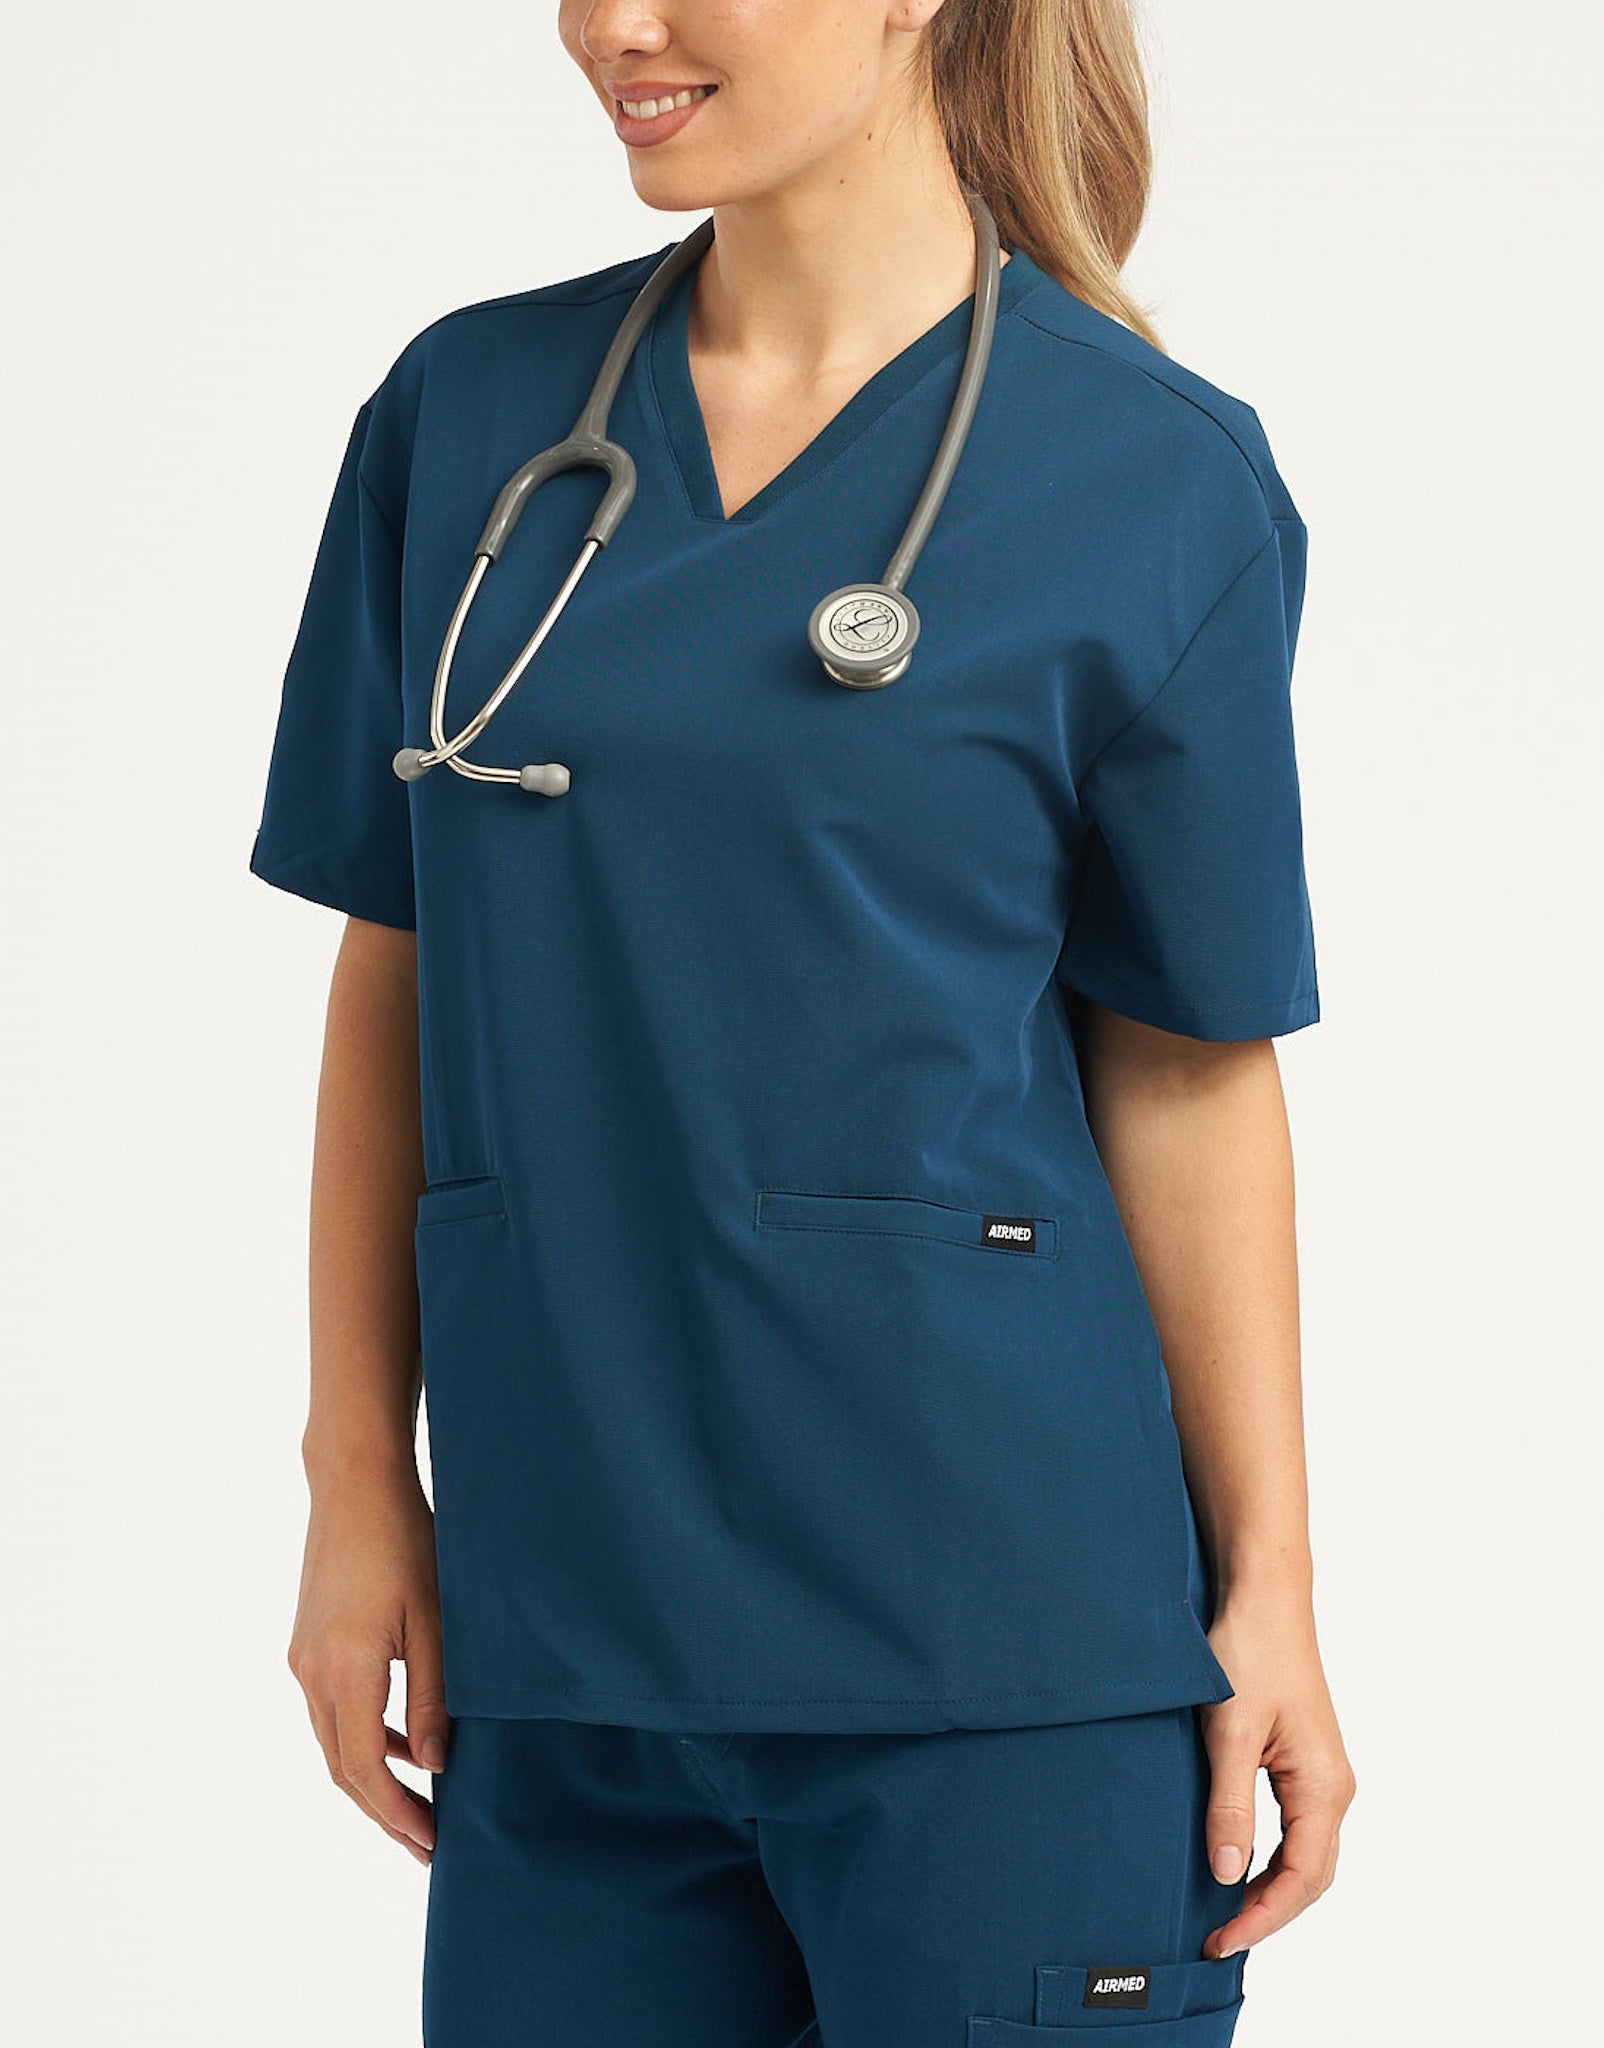 The Most Affordable Nursing Scrubs Online You Will Find! – Airmed